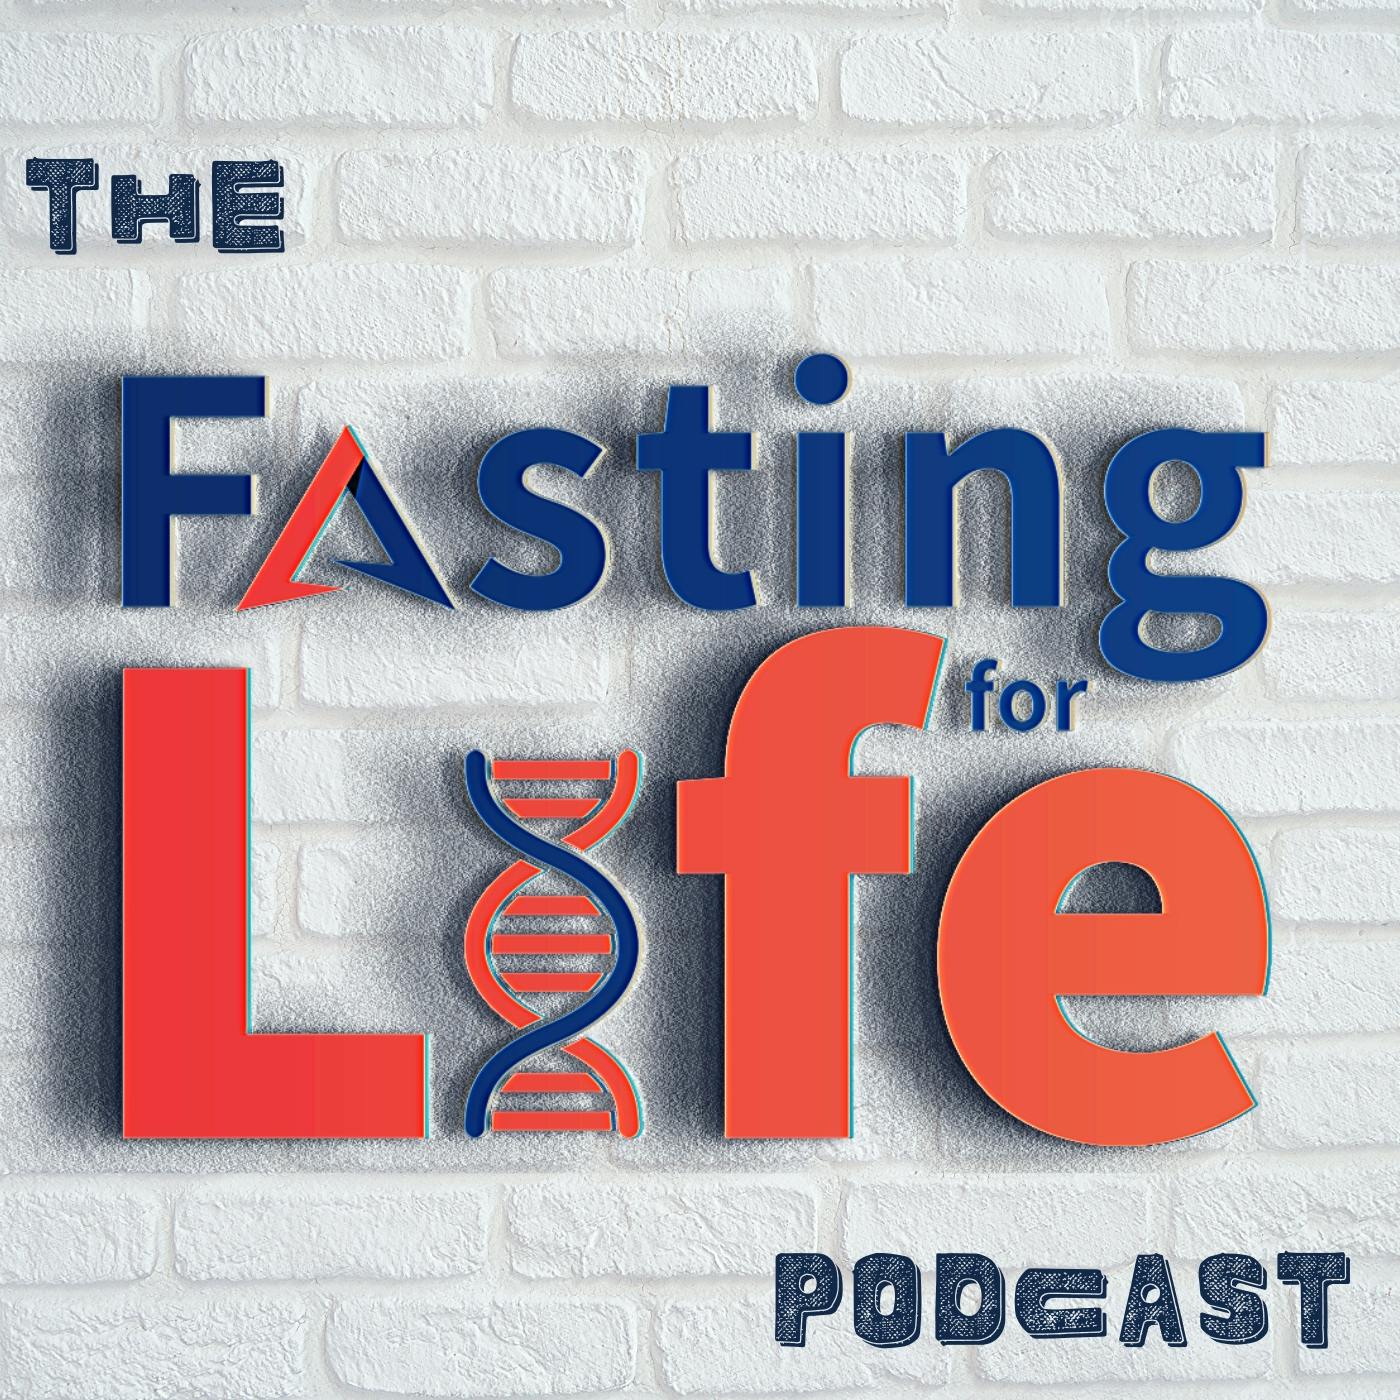 Ep. 127 - Cardiometabolic Benefits of Fasting | Effects of Intermittent Fasting on Health, Aging, and Disease | Free Intermittent Fasting Plan for OMAD